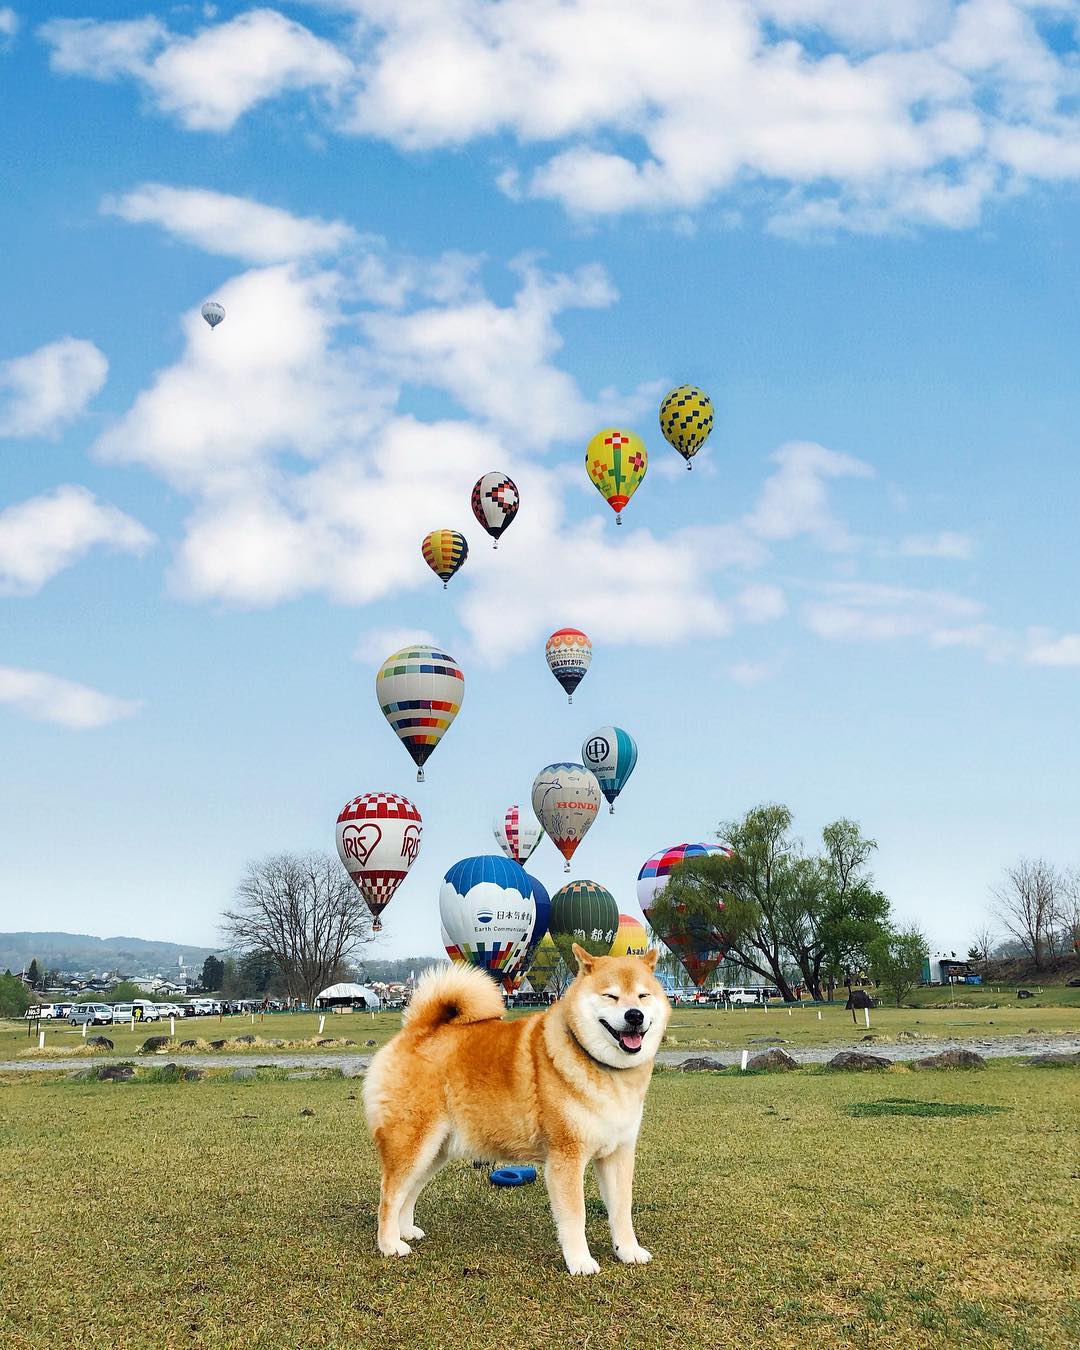 Marutaro Don T You Wish To Make A Flight In A Hot Air Balloon まるも気球に乗りたい パパが気球買いたいって言ってる Moe Pets